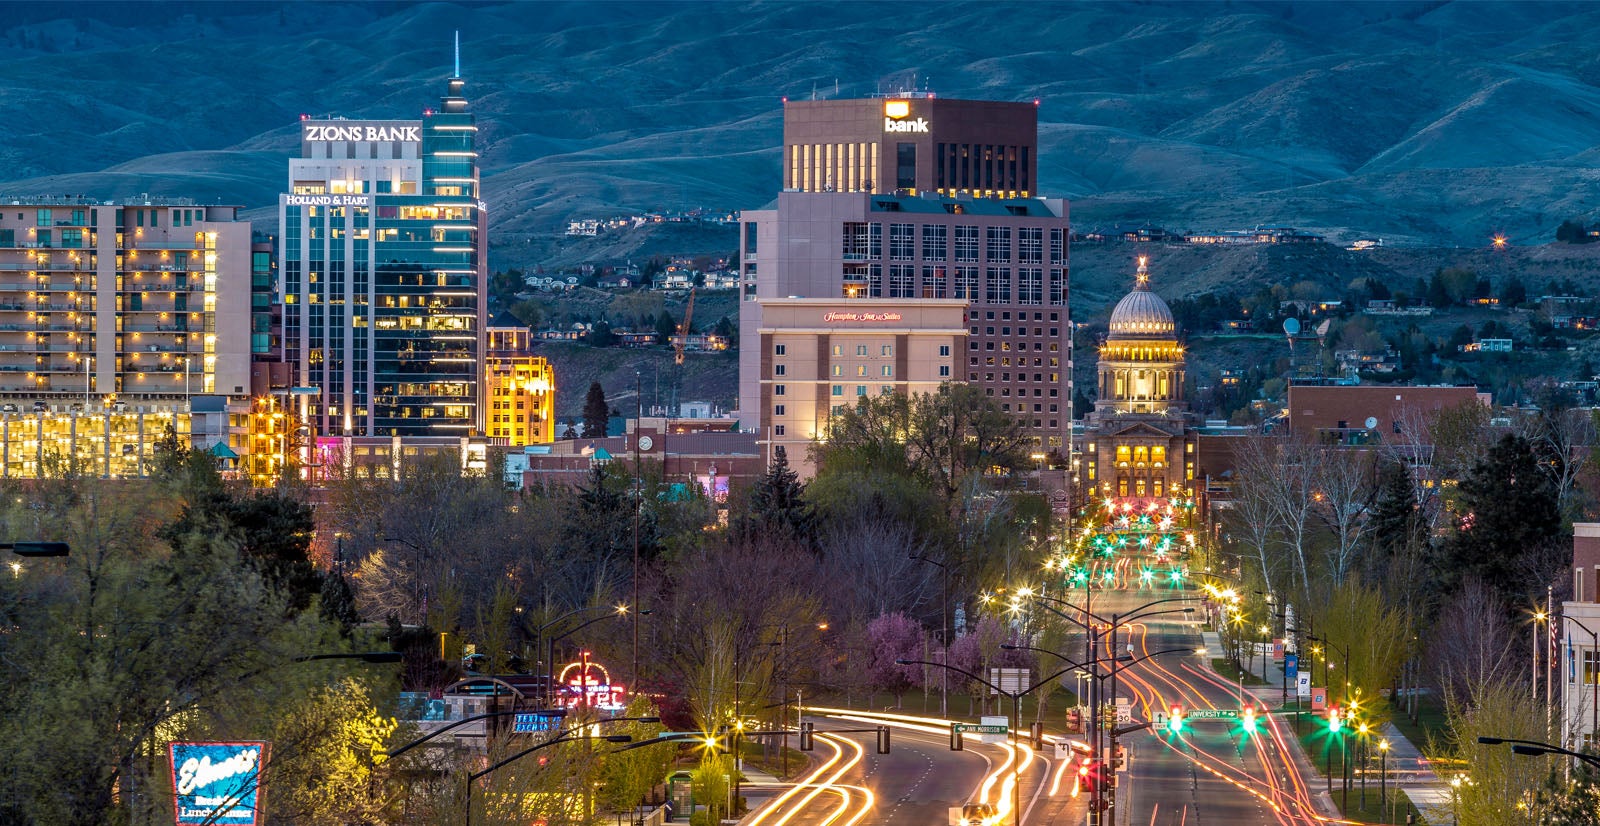 Cityscape of Boise at night